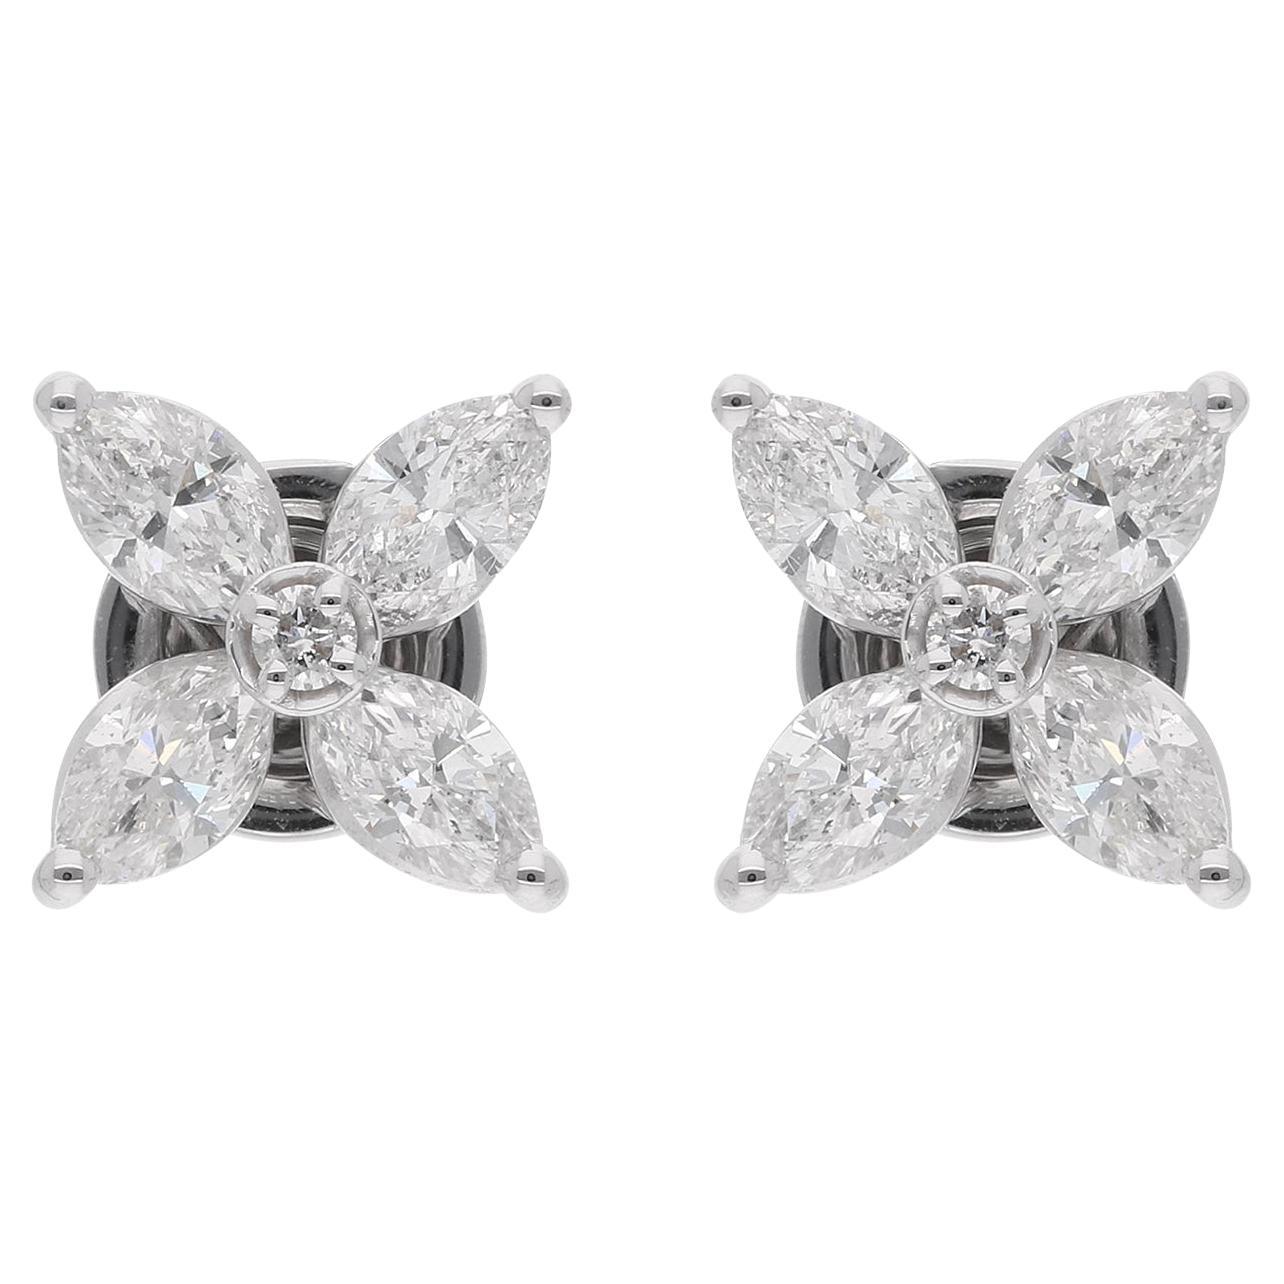 1.6 Carat SI Clarity HI Color Marquise Diamond Stud Earrings 18 Karat White Gold For Sale